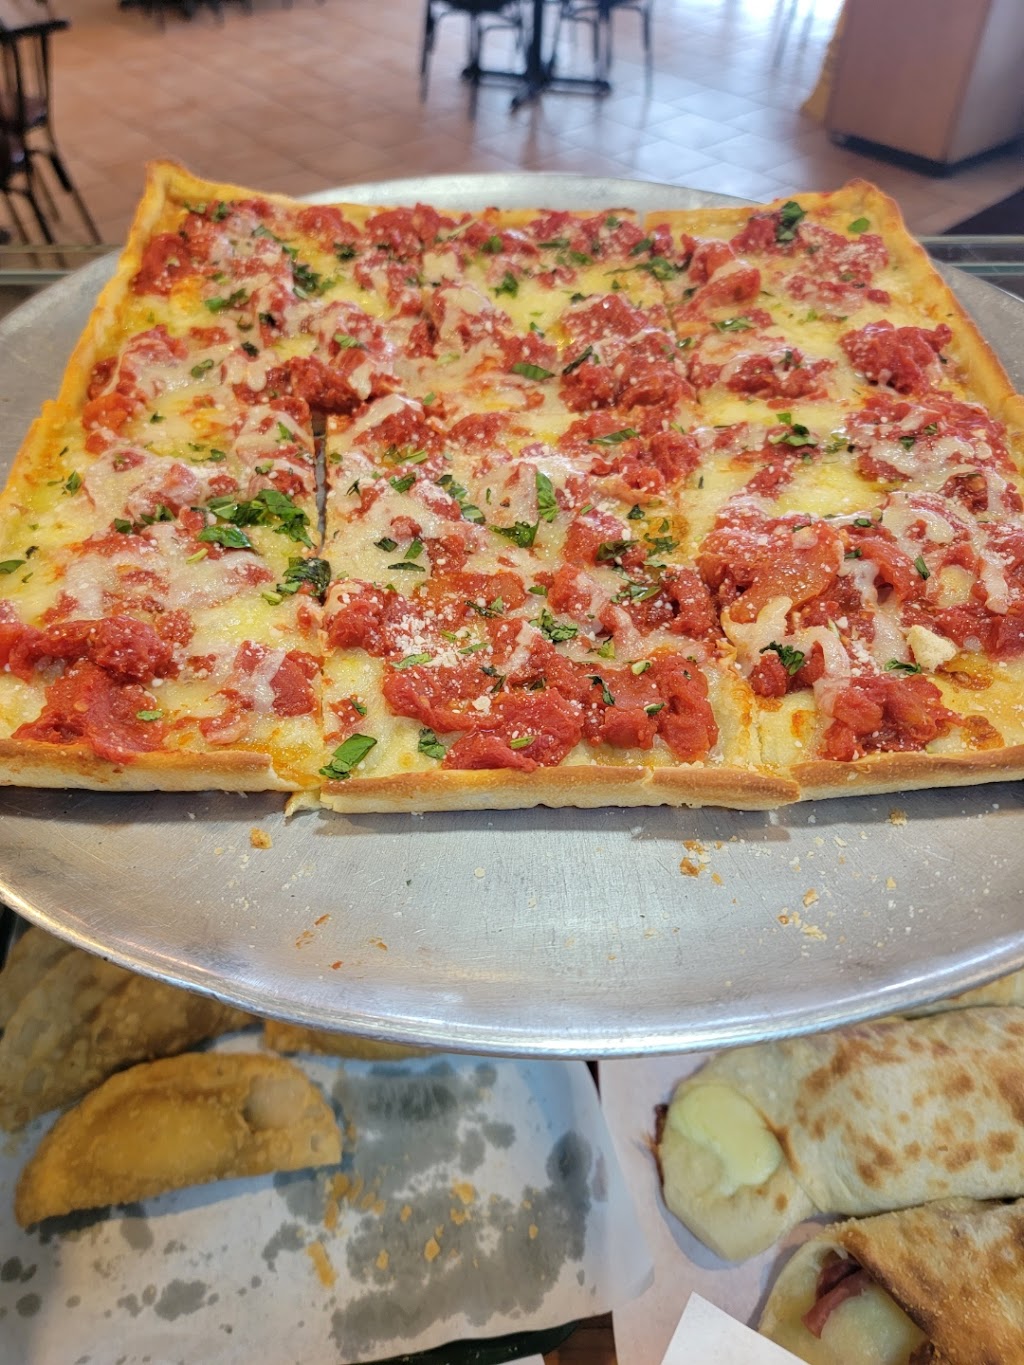 Franks Pizza (Mt. Olive) | 7 Naughright Rd, Hackettstown, NJ 07840 | Phone: (908) 979-3113